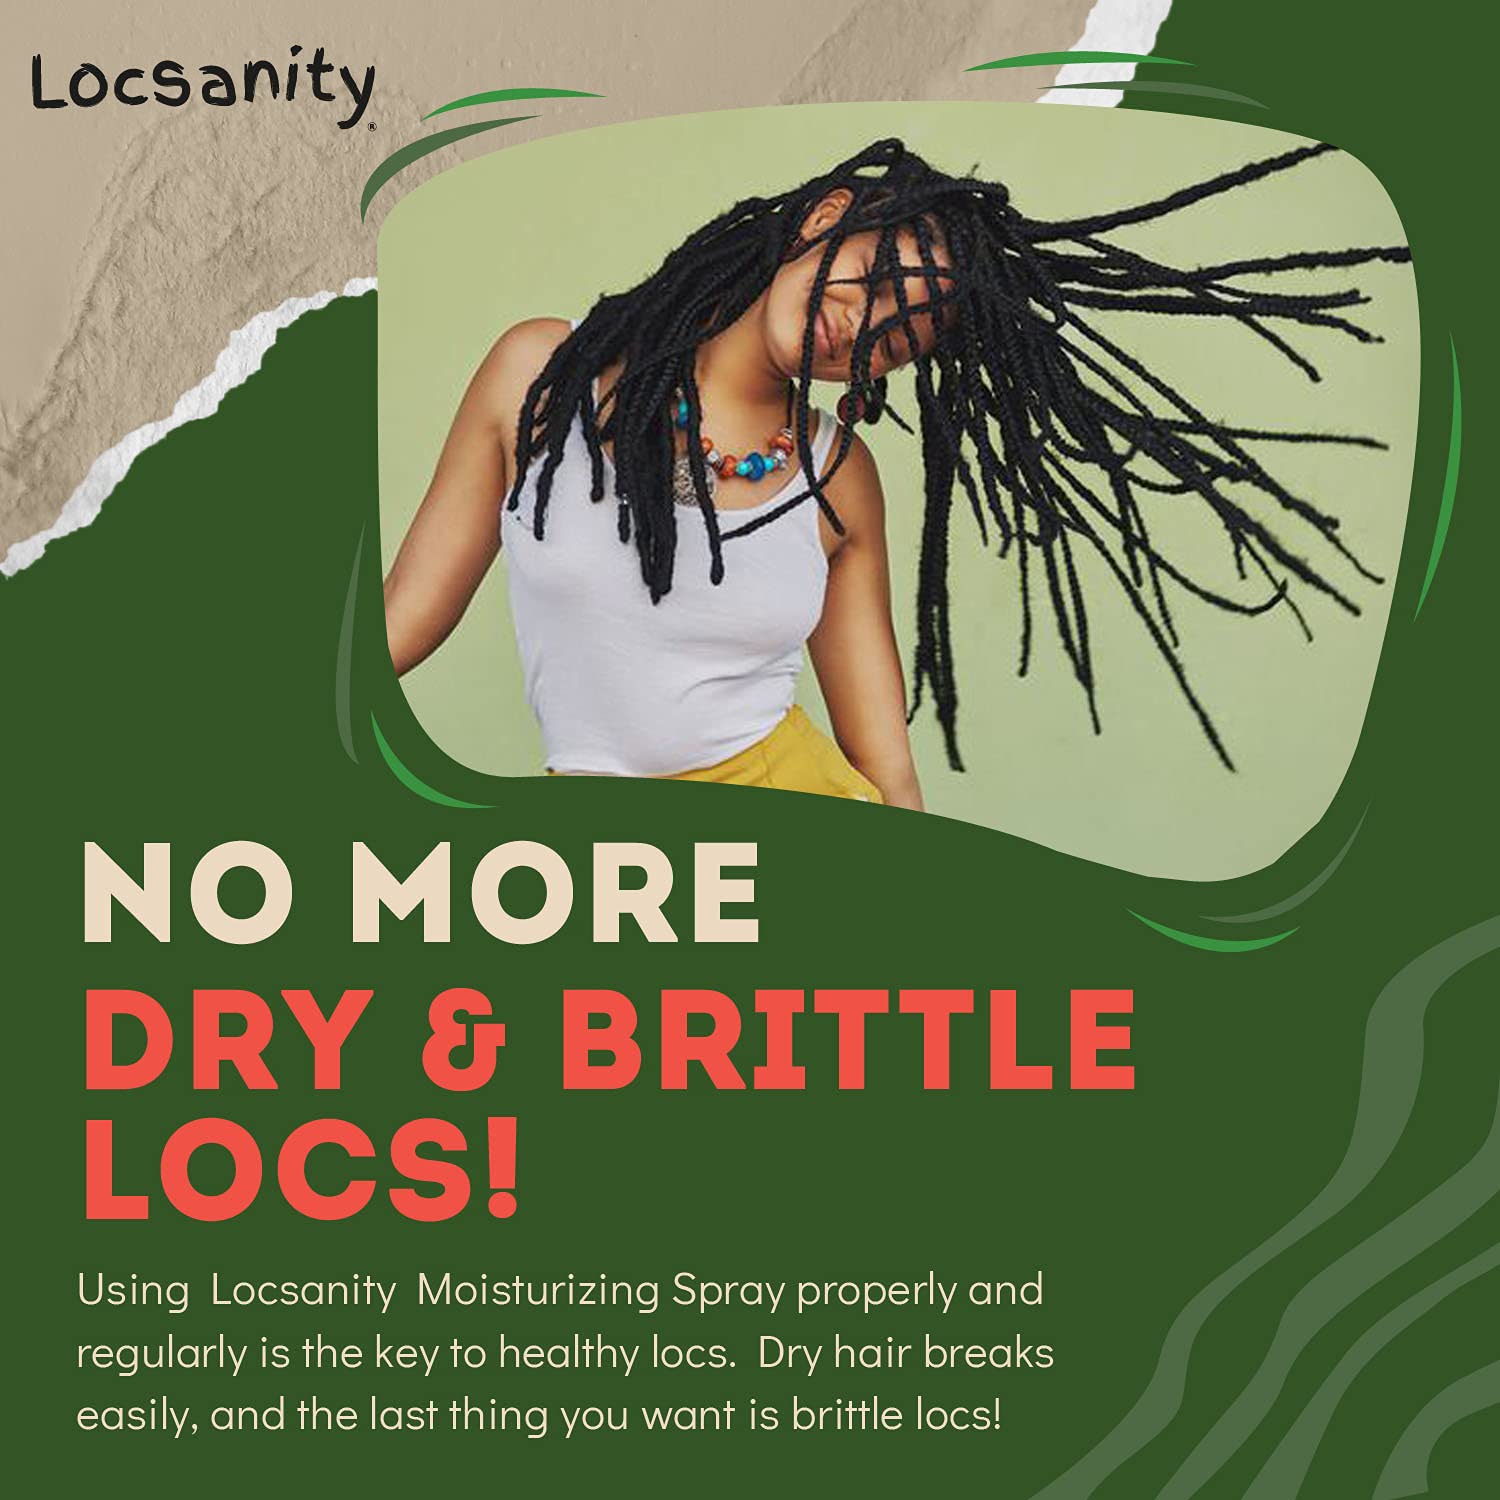 Locsanity Daily Moisturizing Refreshing Spray for Locs, Dreadlocks - Rose Water and Peppermint Hair Scalp Moisturizer, Dreadlock Spray - Natural Loc Care and Maintenance (8oz)